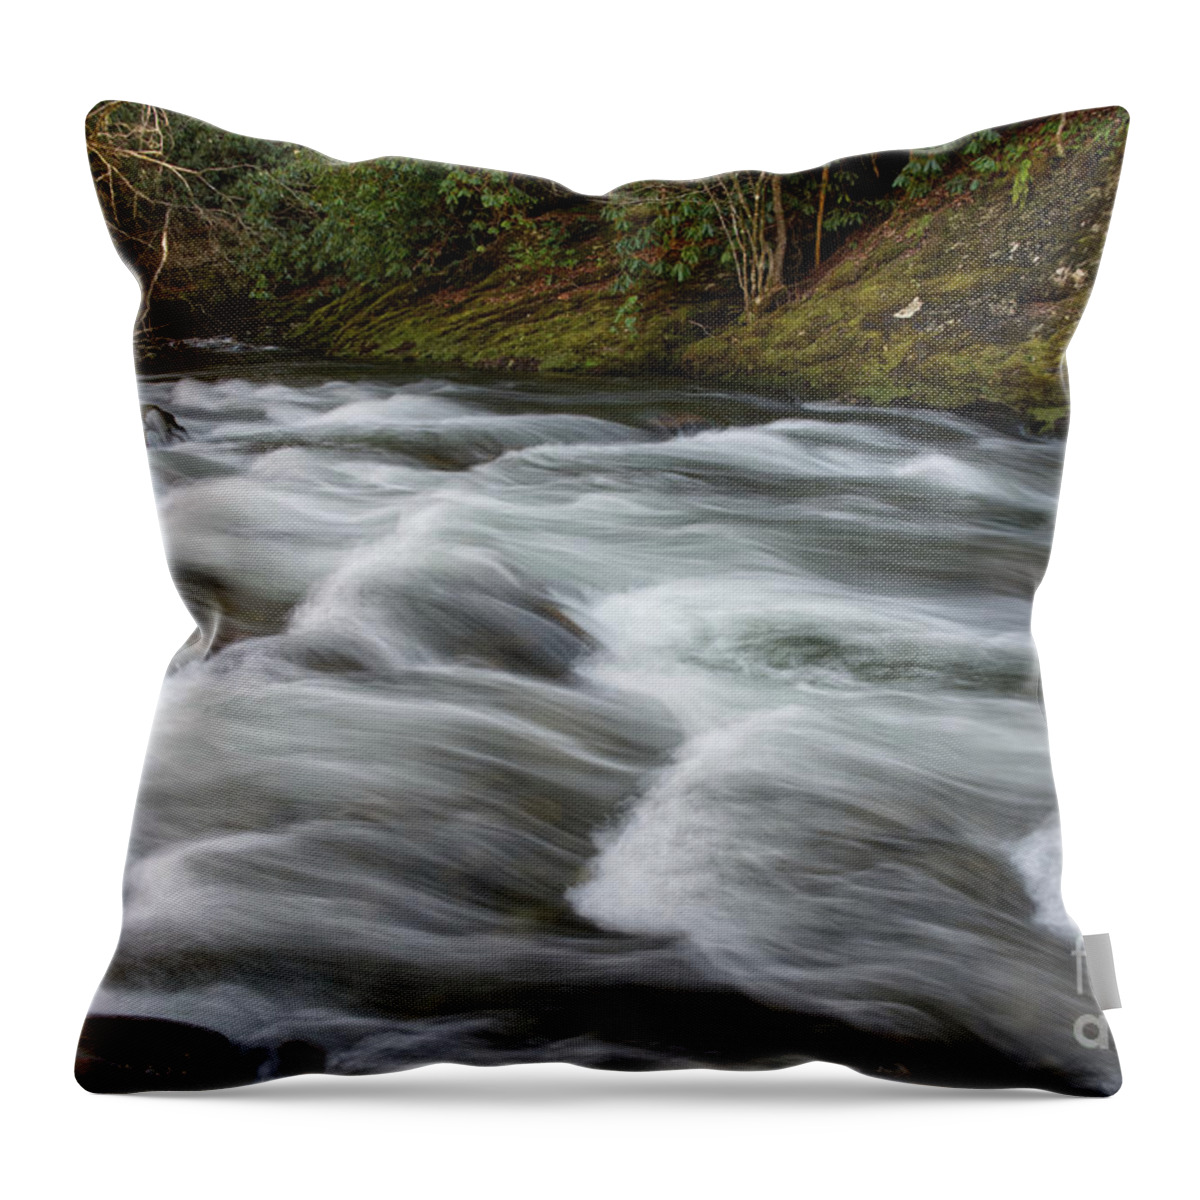 Smokies Throw Pillow featuring the photograph Little River Rapids 21 by Phil Perkins